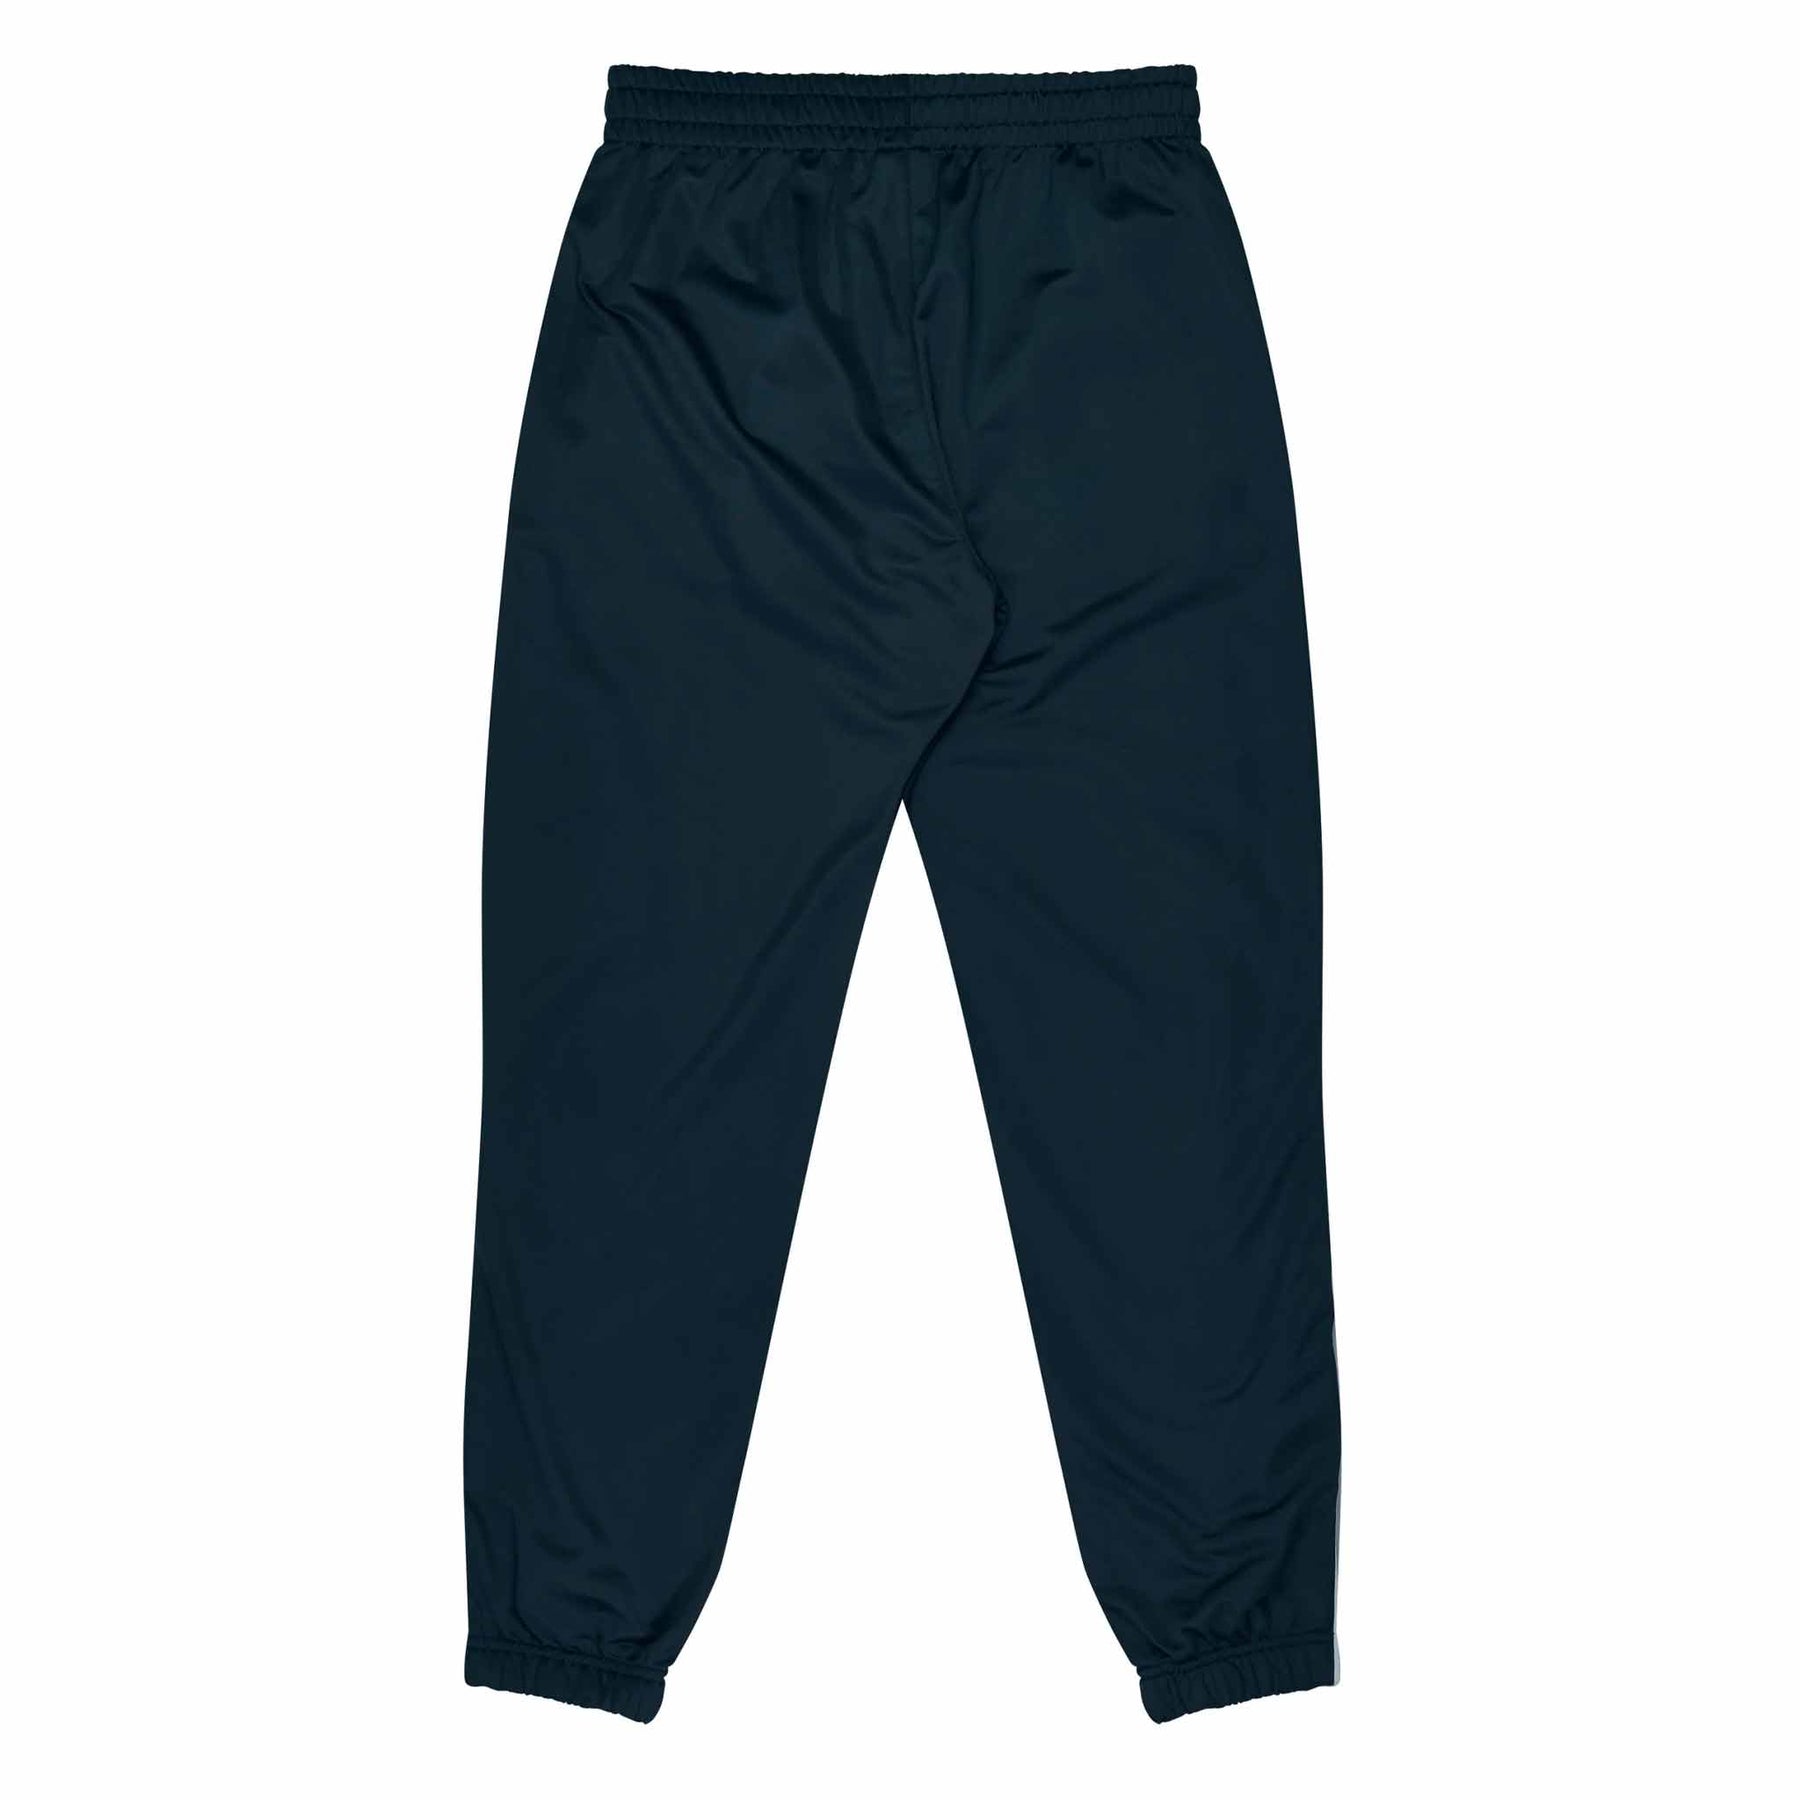 aussie pacific liverpool pants in navy